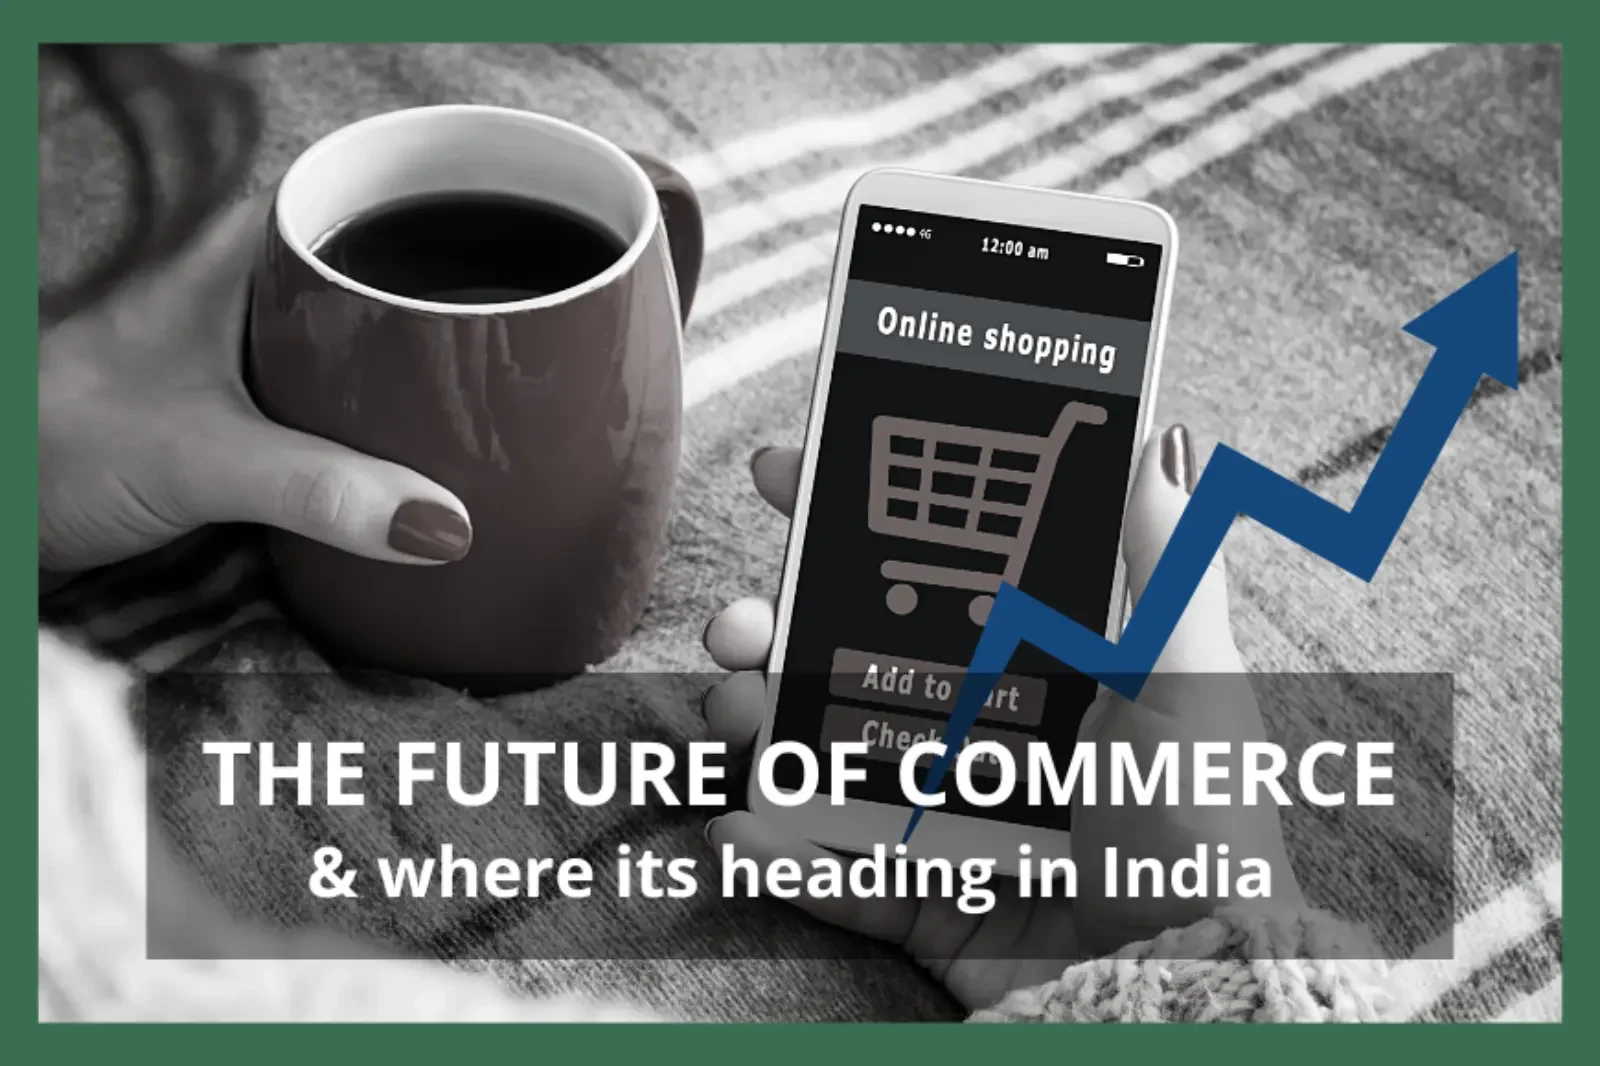 The Future of Commerce and where its heading in India